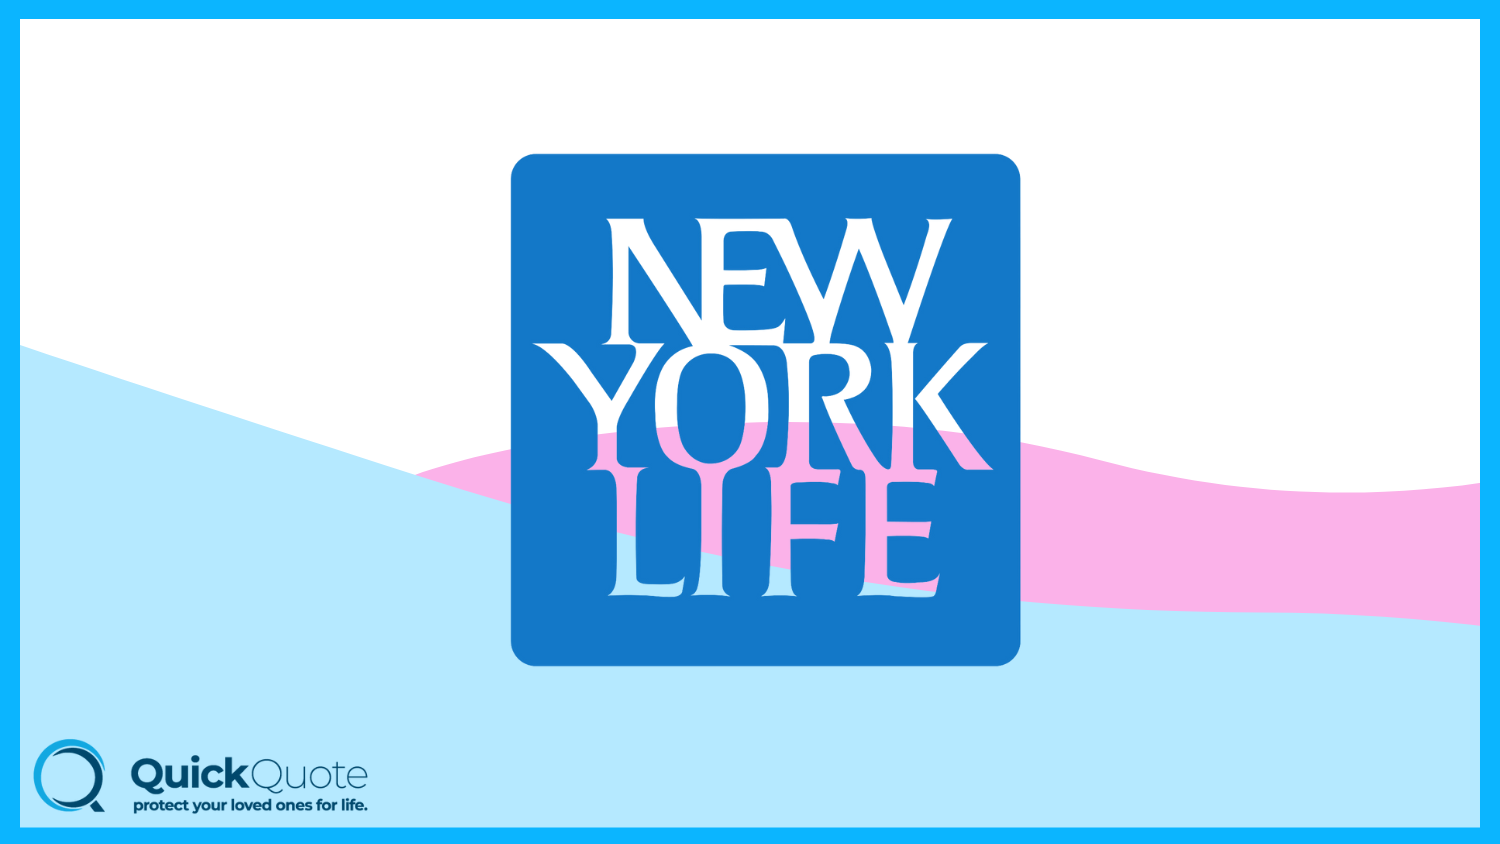 New York Life: Best Life Insurance for Police Officers